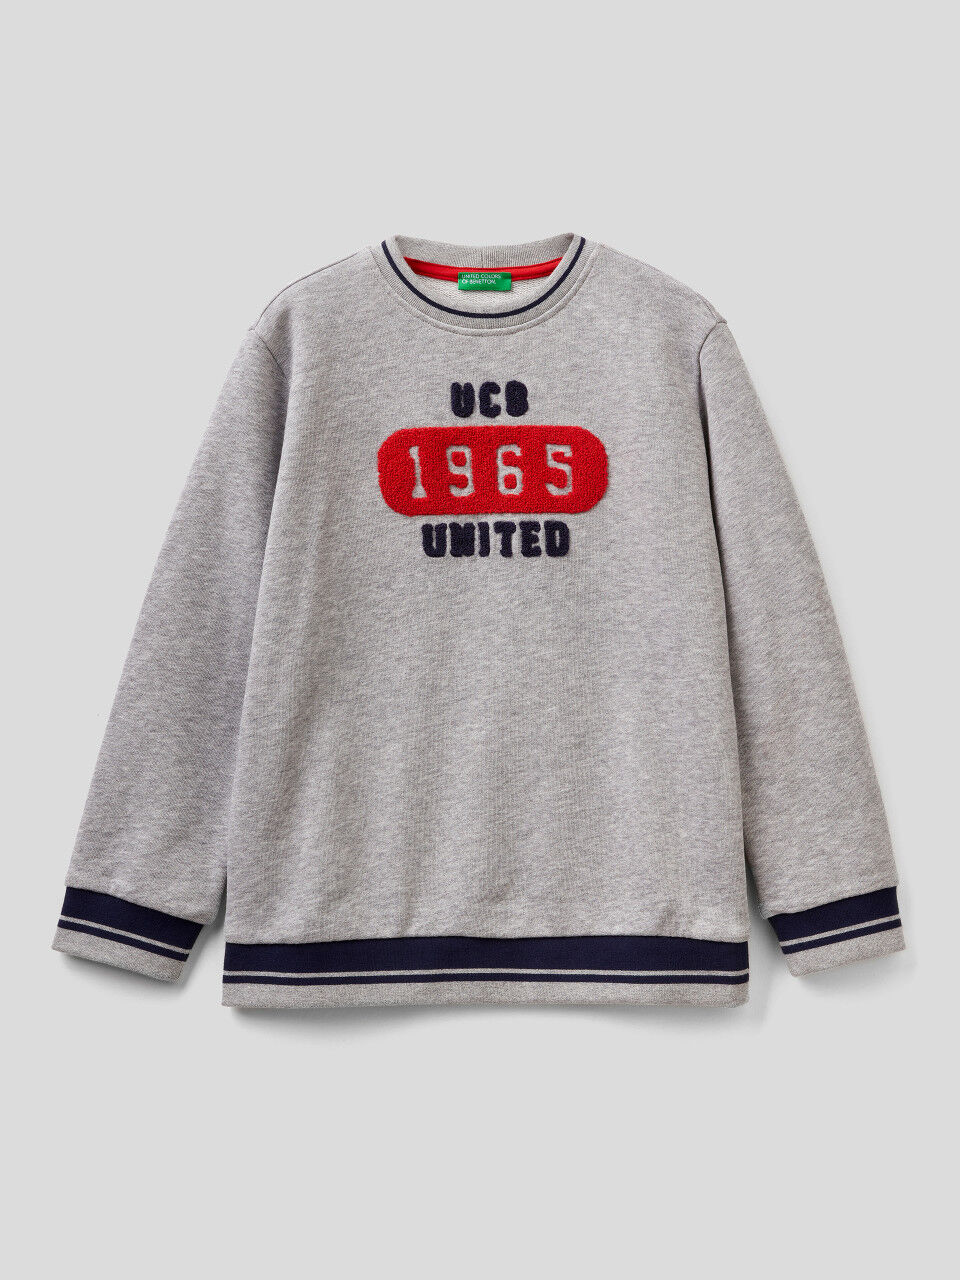 100% cotton sweatshirt with embroidery